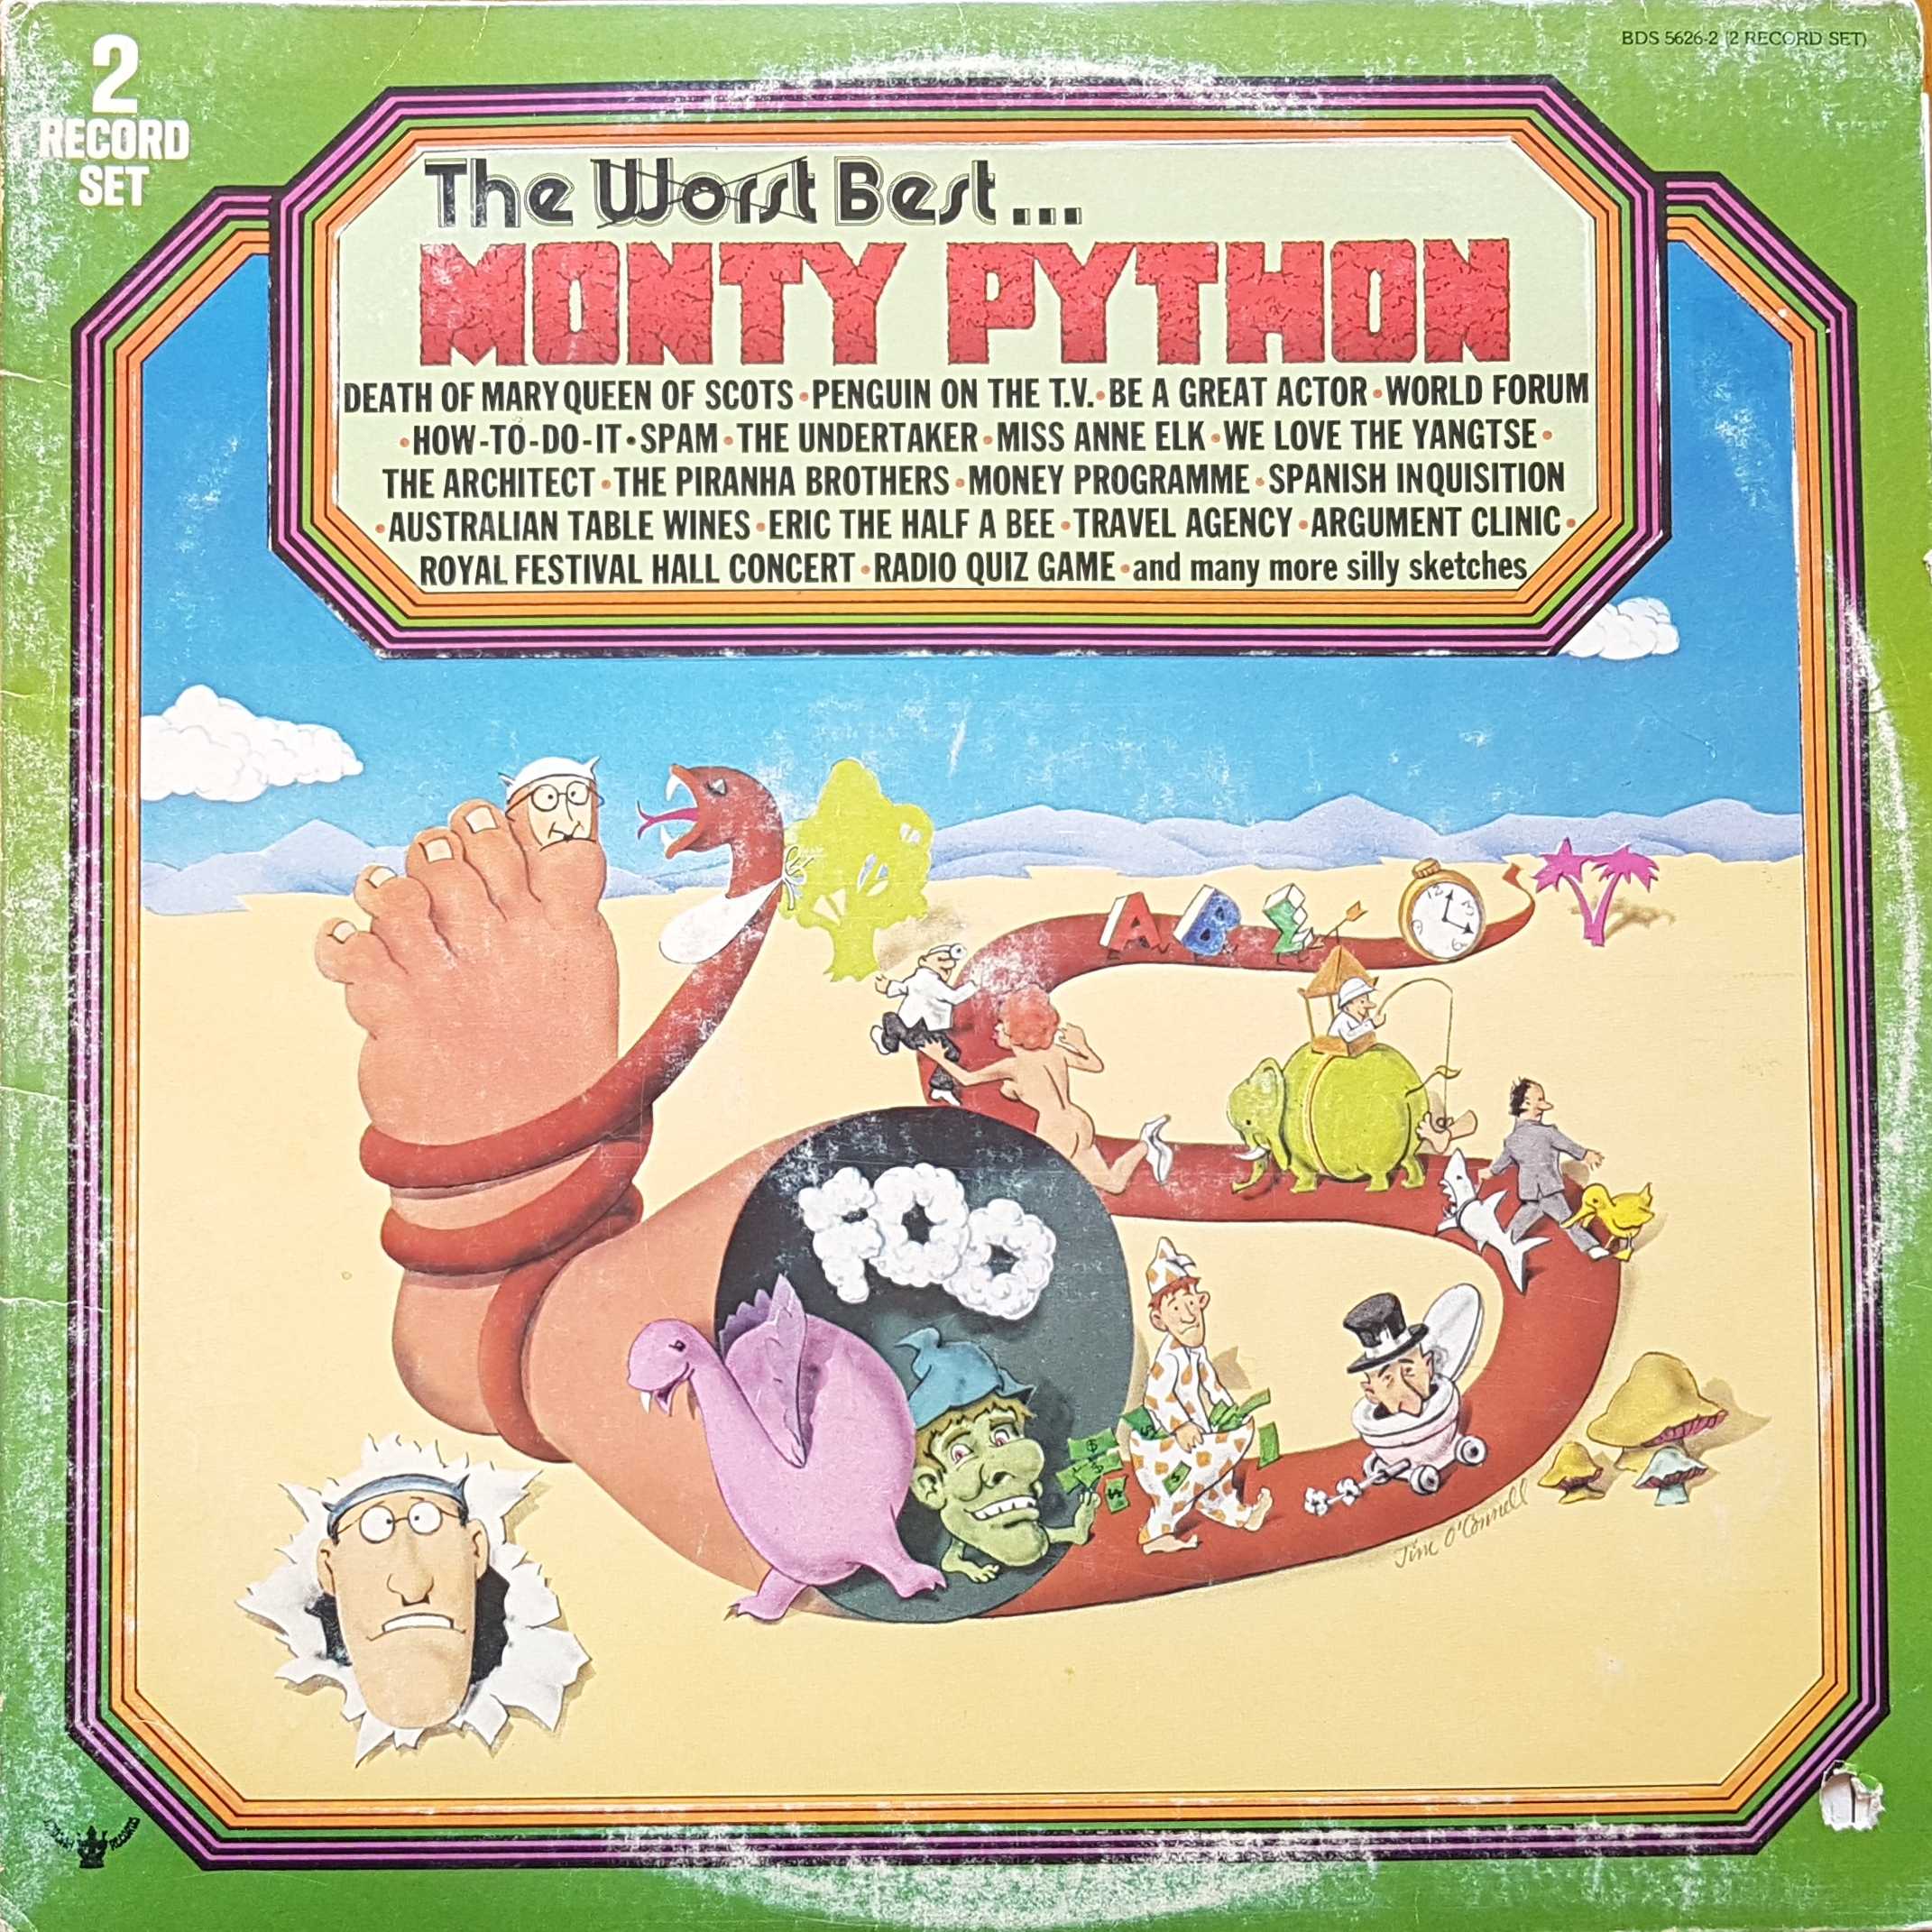 Picture of The (worst) best of Monty Python by artist Monty Python from the BBC albums - Records and Tapes library